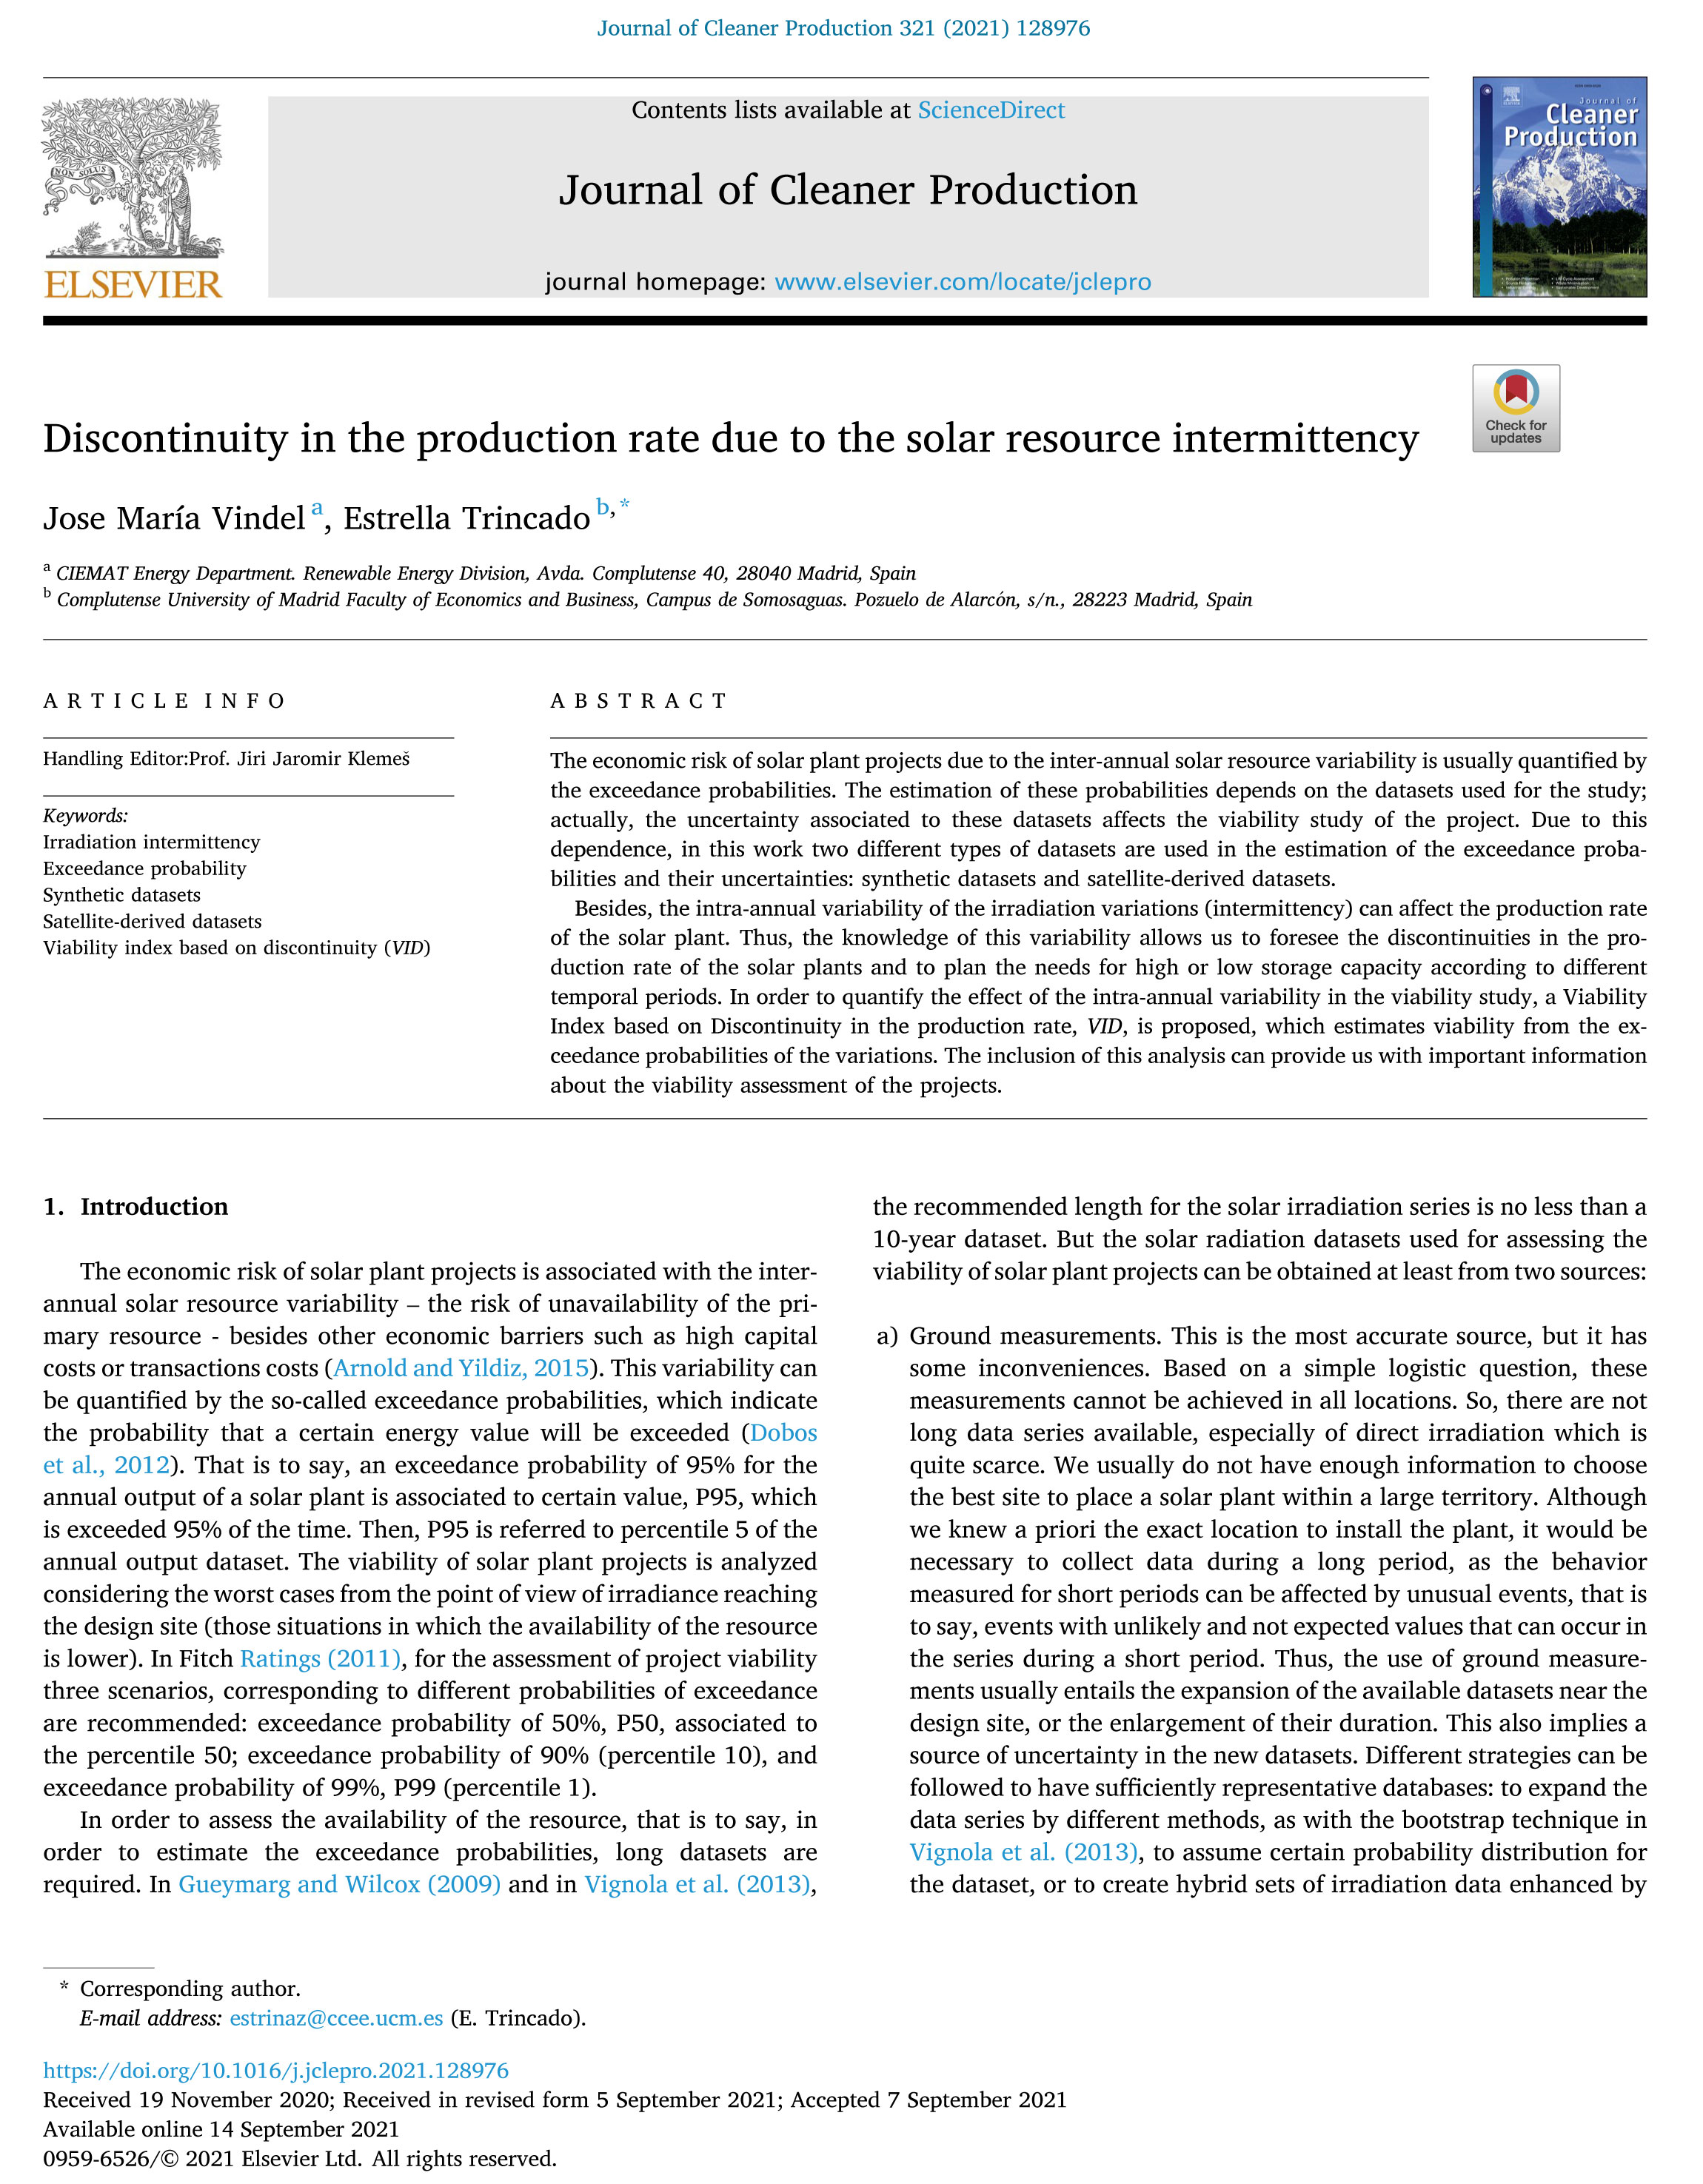 discontinuity-in-the-production-rate-due-to-the-solar-resource-intermittenc